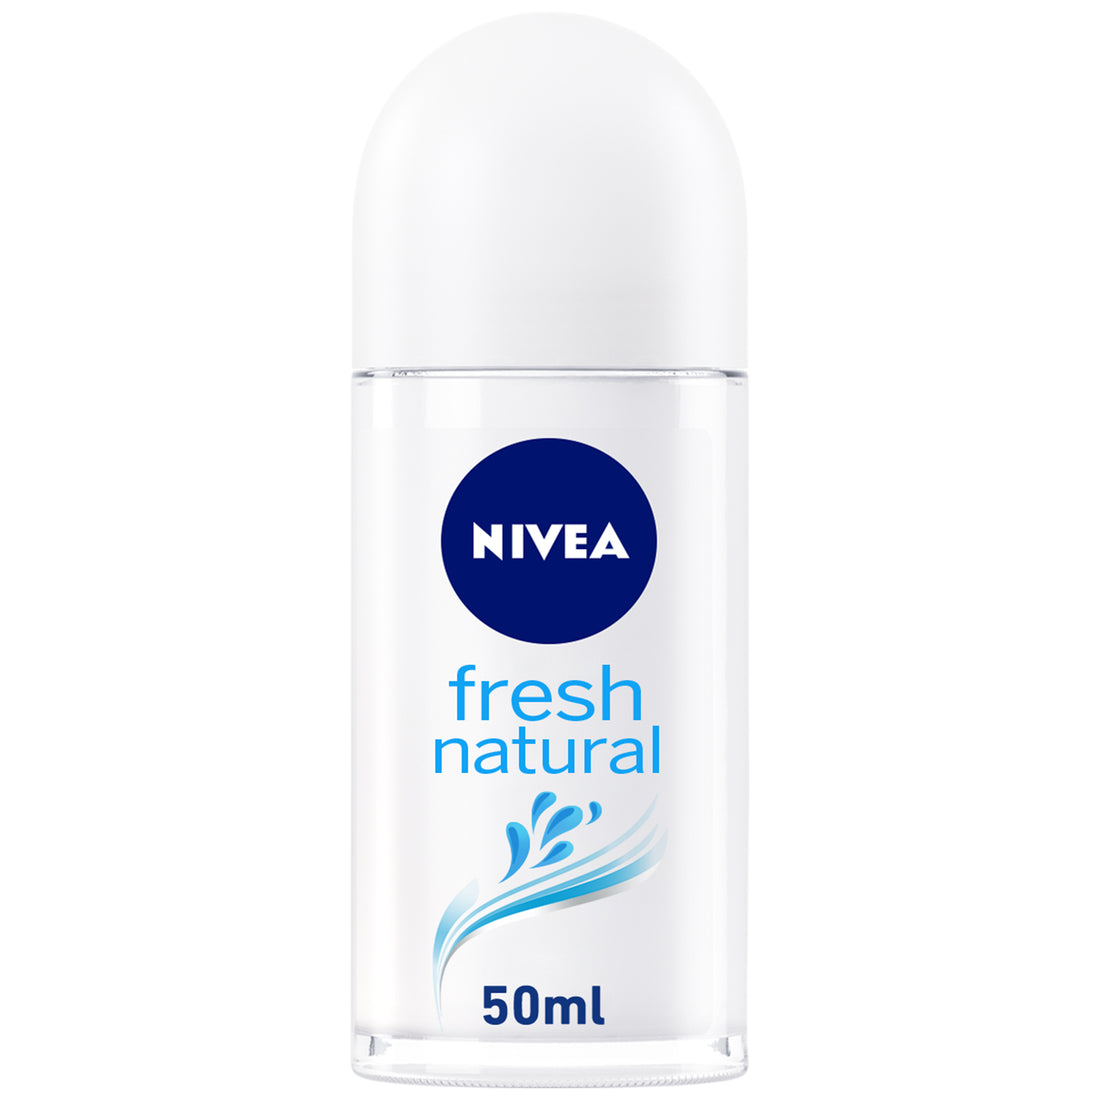 Nivea Fresh Natural, Deodorant for Women, Ocean Extracts, Roll-on 50ml